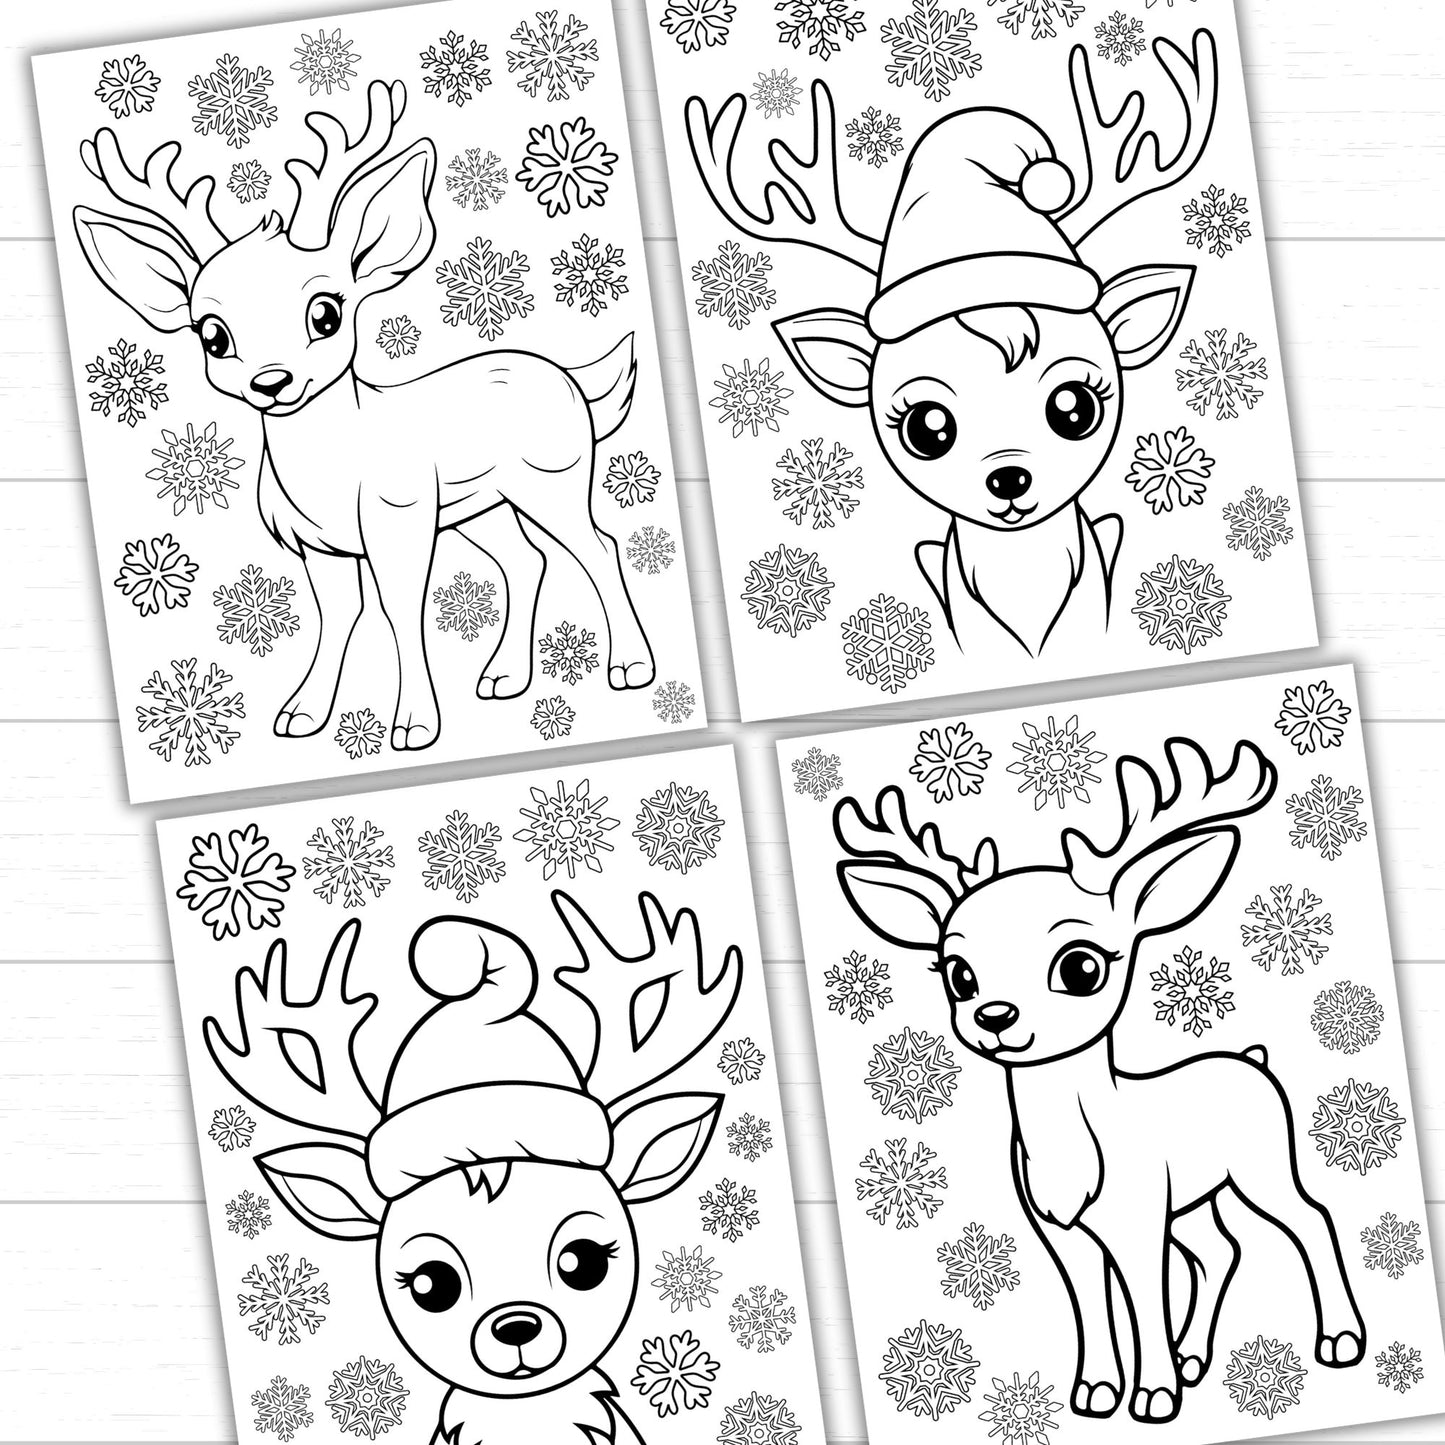 Christmas Reindeer Coloring Pages, Winter Reindeer Coloring Pages, Reindeer Coloring Pages, Christmas Coloring Pages, Christmas Activities